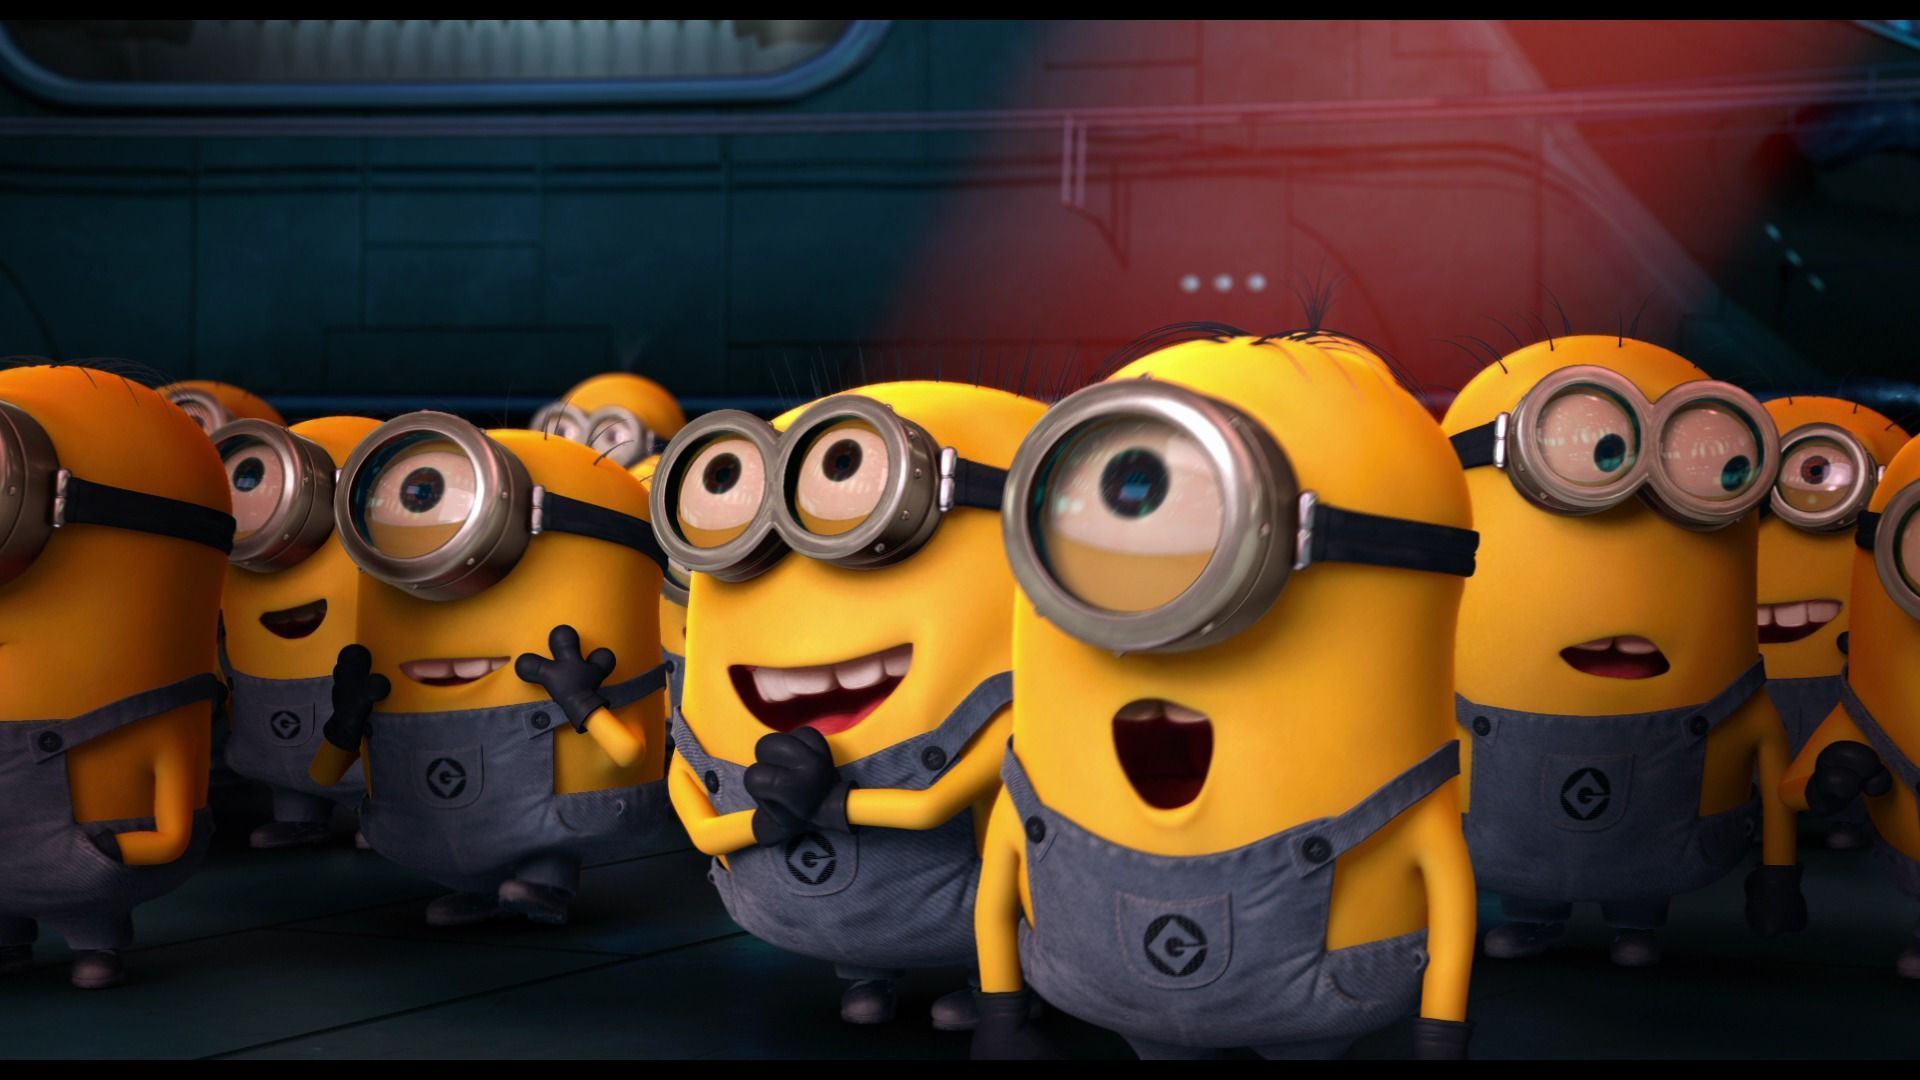 Download HD Minion Wallpapers for Mobile Phones